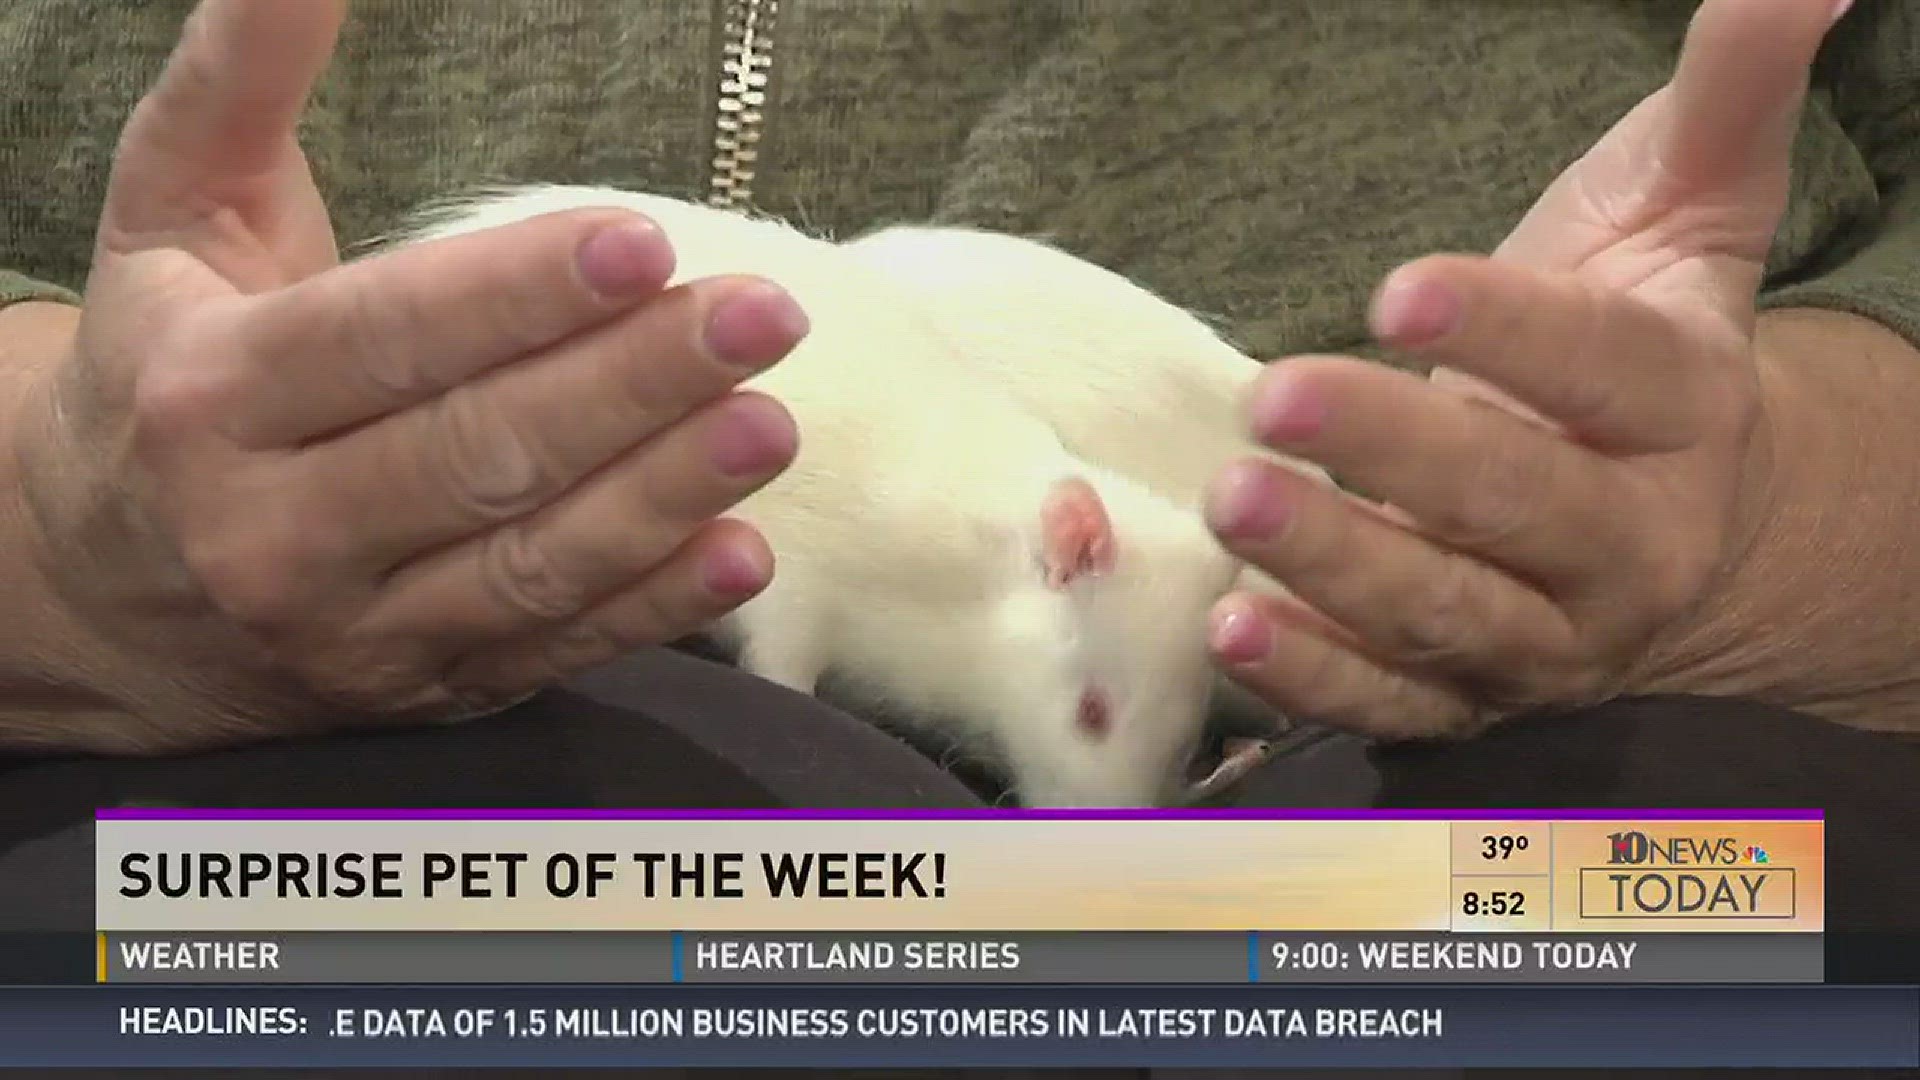 Monica with the Young-Williams Animal Center brought two adoptable white rats to the 10News studios.